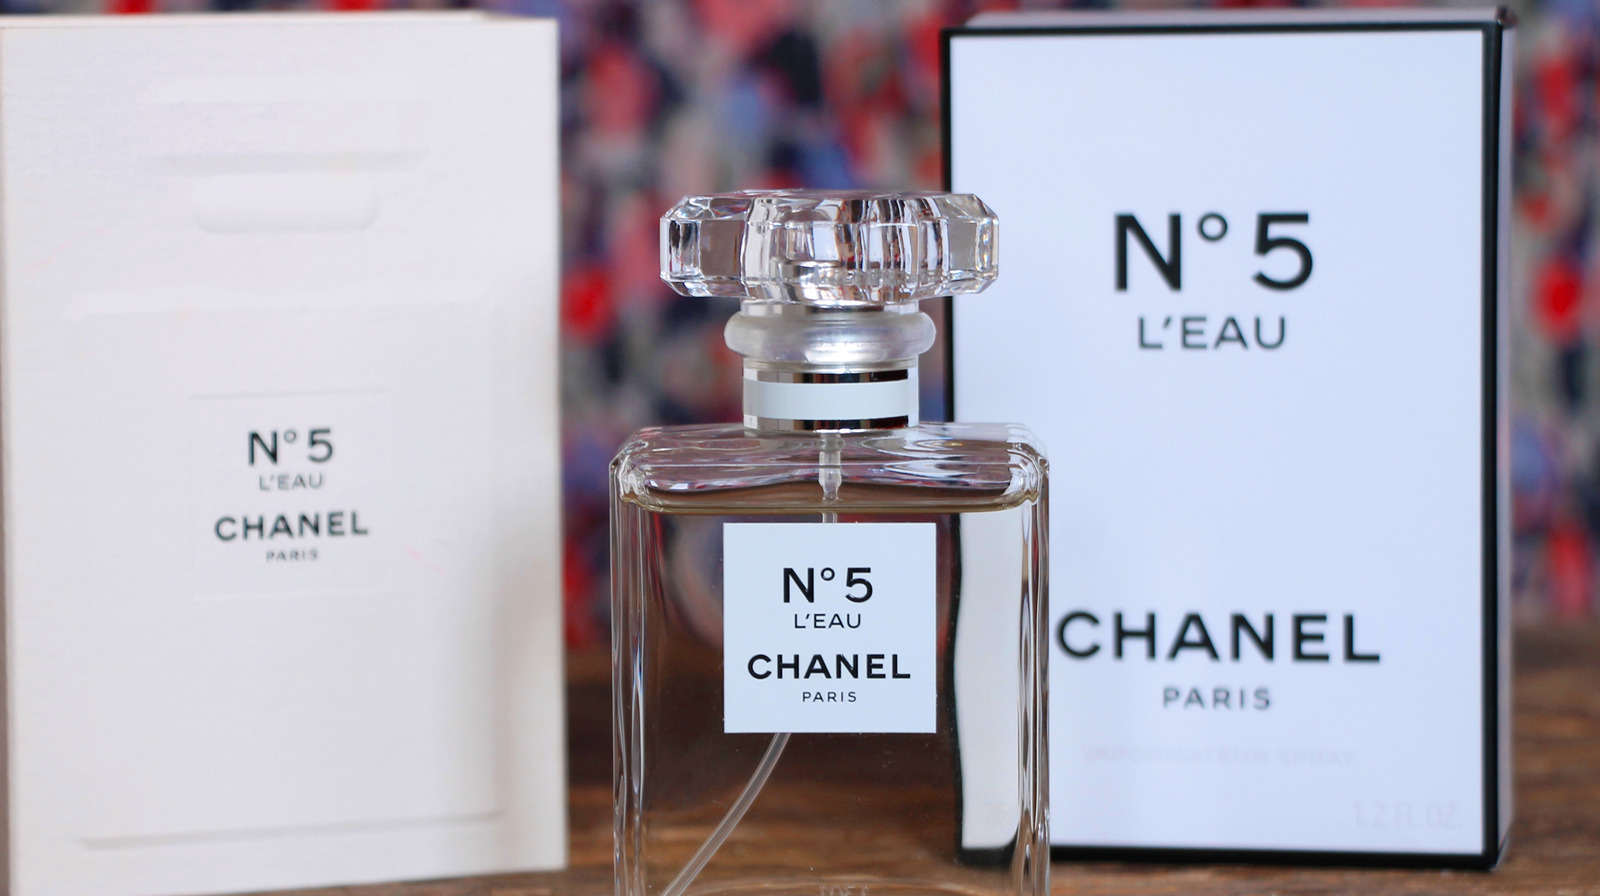 Chanel is under fire for this Advent calendar controversy Nailjam